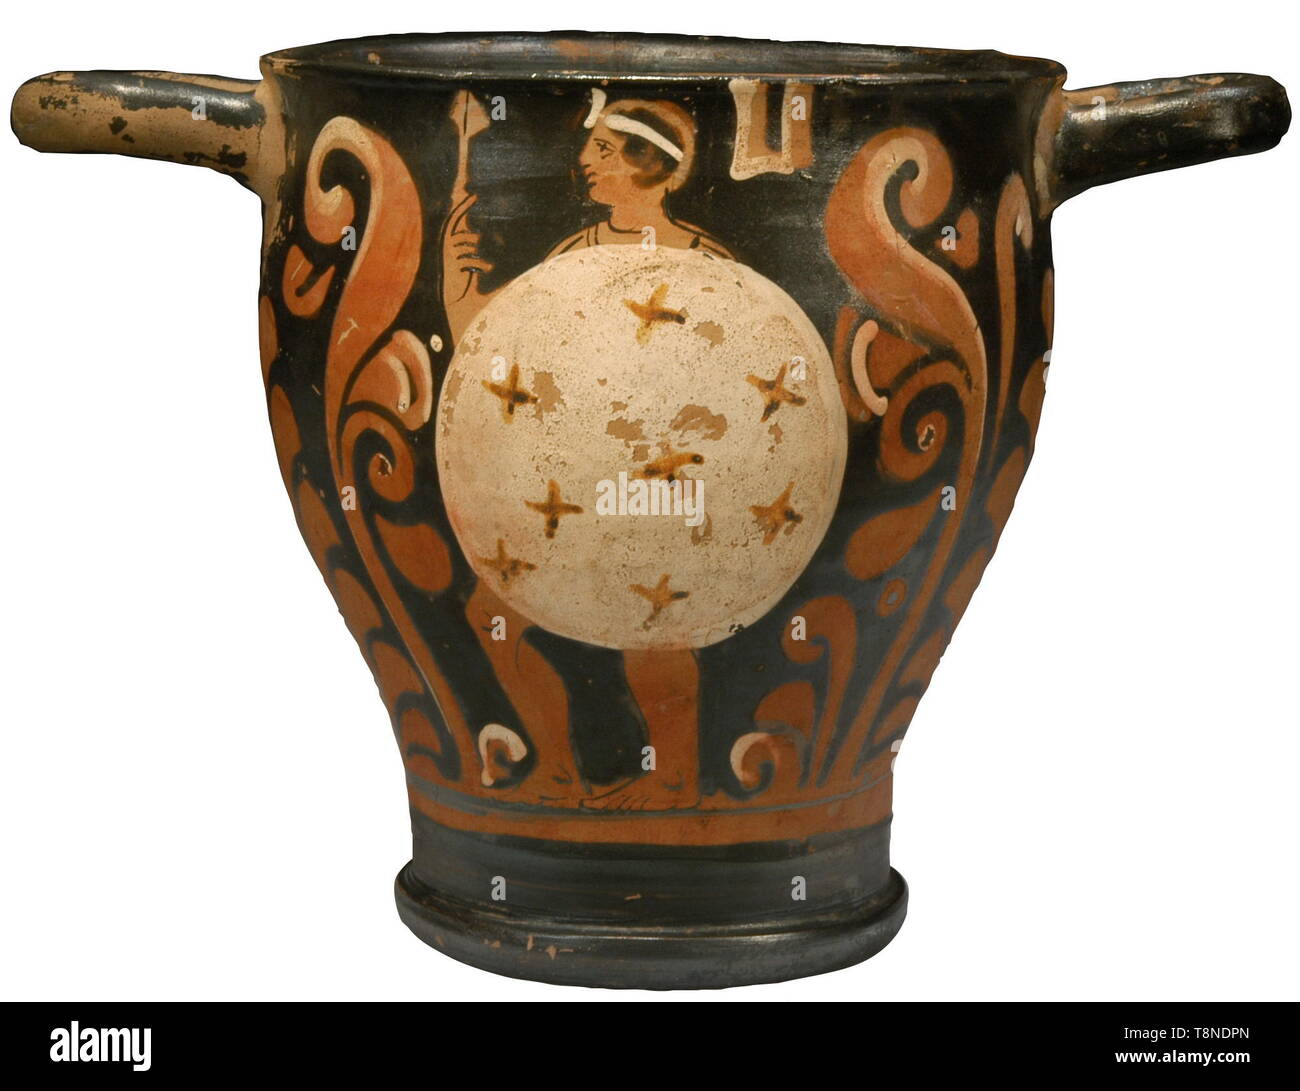 A Campanian red-figure skyphos by the frignano painter, 360 - 330 BC A warrior, wearing a white bandeau, holds a large circular white shield with ochre crosses, and a spear in his right hand, Rev: A draped youth, wearing a white bandeau, in a himation. Height 15.1 cm. Exhibited: The Borchardt Library, La Trobe University, Melbourne, Australia, April 1995 - April 2008. The Fignano Painter painted mainly vases of smal dimensions, and decorated them with single figure compositions. The use of white for outlining palmettes leaves are typical of his w, Additional-Rights-Clearance-Info-Not-Available Stock Photo